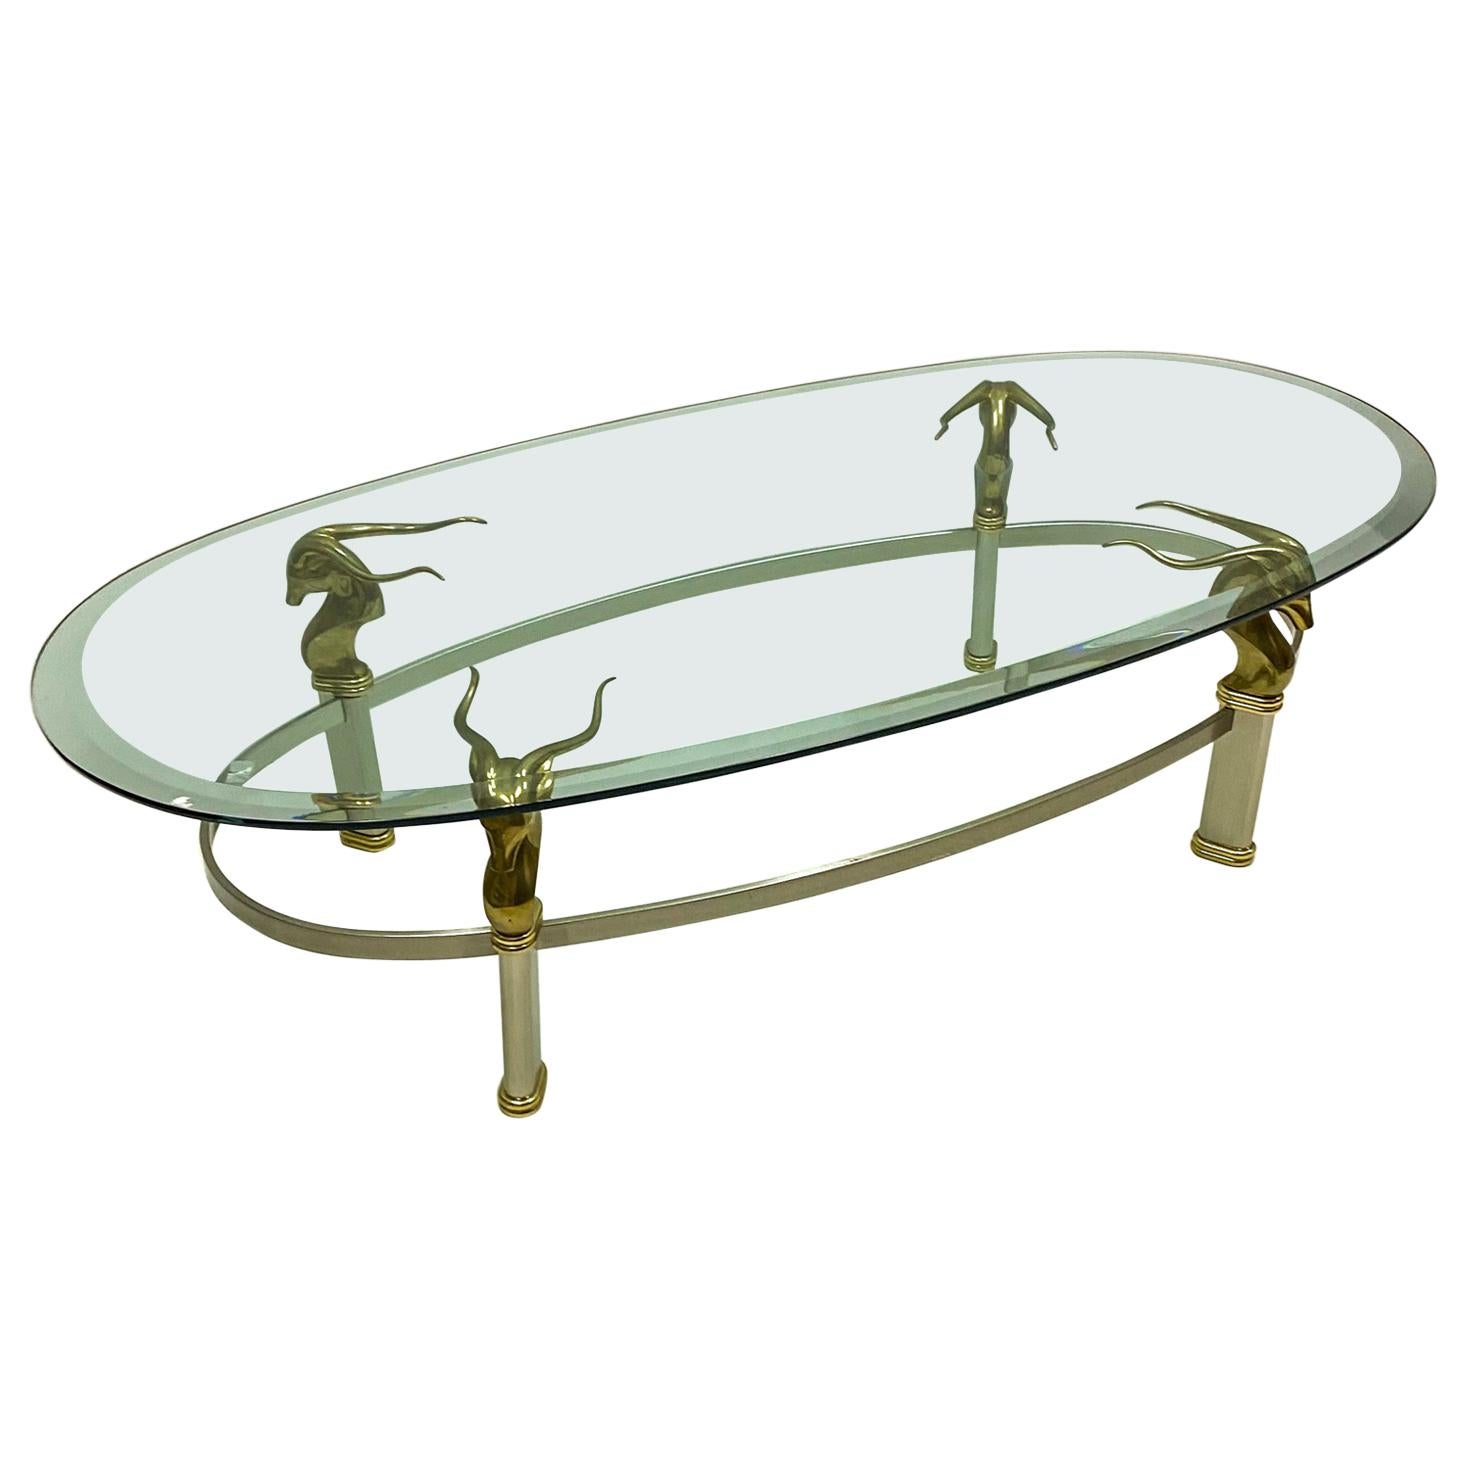 1970s Neoclassical Style Italian Brass, Steel, and Glass Coffee Table